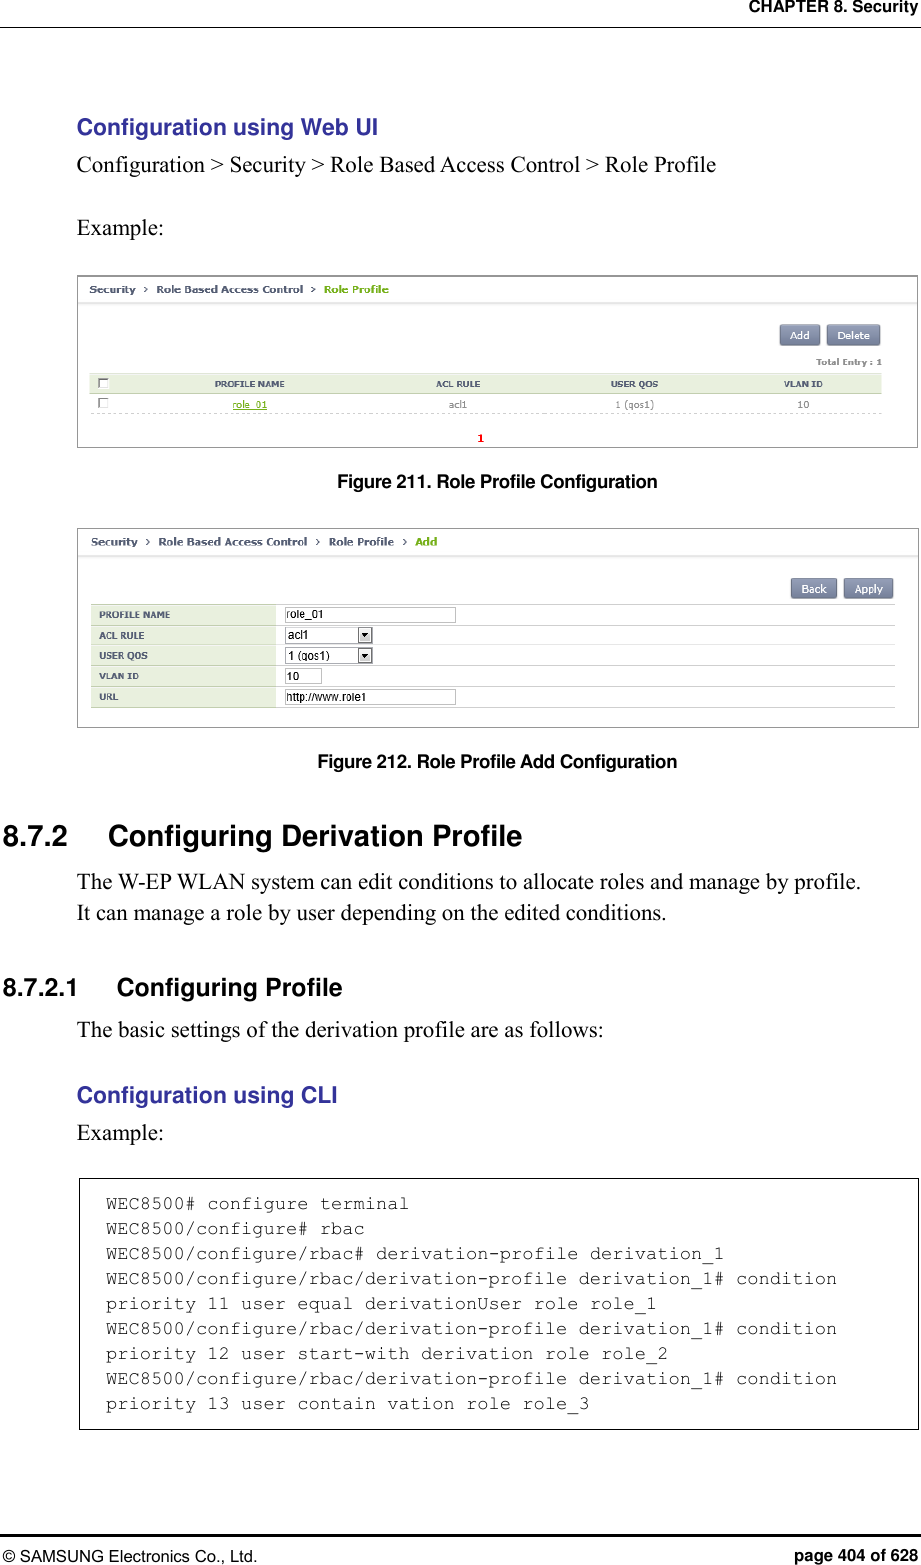 CHAPTER 8. Security © SAMSUNG Electronics Co., Ltd.  page 404 of 628 Configuration using Web UI Configuration &gt; Security &gt; Role Based Access Control &gt; Role Profile  Example:  Figure 211. Role Profile Configuration    Figure 212. Role Profile Add Configuration  8.7.2  Configuring Derivation Profile The W-EP WLAN system can edit conditions to allocate roles and manage by profile. It can manage a role by user depending on the edited conditions.  8.7.2.1  Configuring Profile The basic settings of the derivation profile are as follows:  Configuration using CLI Example:  WEC8500# configure terminal WEC8500/configure# rbac WEC8500/configure/rbac# derivation-profile derivation_1 WEC8500/configure/rbac/derivation-profile derivation_1# condition priority 11 user equal derivationUser role role_1 WEC8500/configure/rbac/derivation-profile derivation_1# condition priority 12 user start-with derivation role role_2 WEC8500/configure/rbac/derivation-profile derivation_1# condition priority 13 user contain vation role role_3 